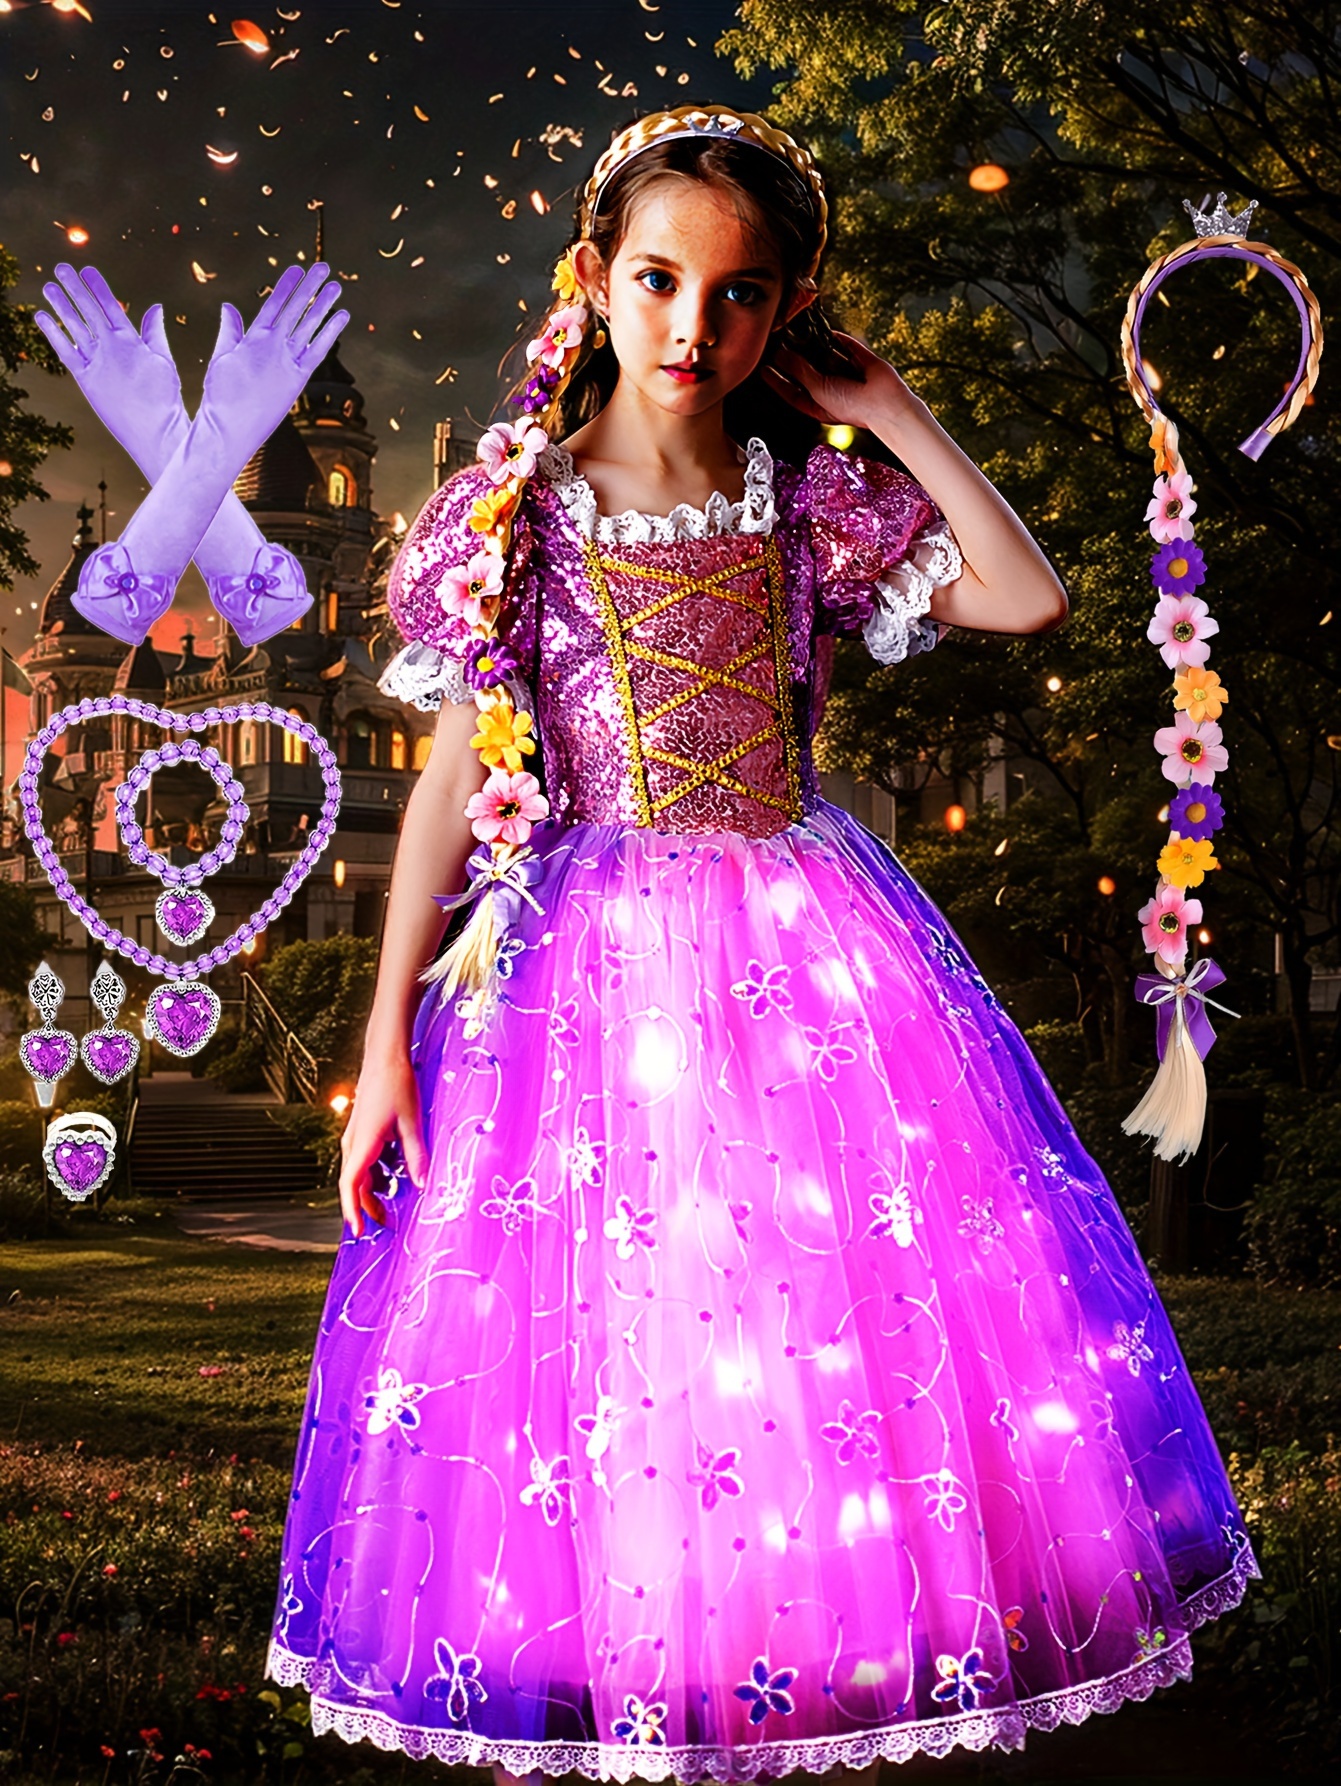 sequin decor puff short sleeve princess dress dreamy led dresses for girls carnival birthday party performance halloween prom gift battery not included